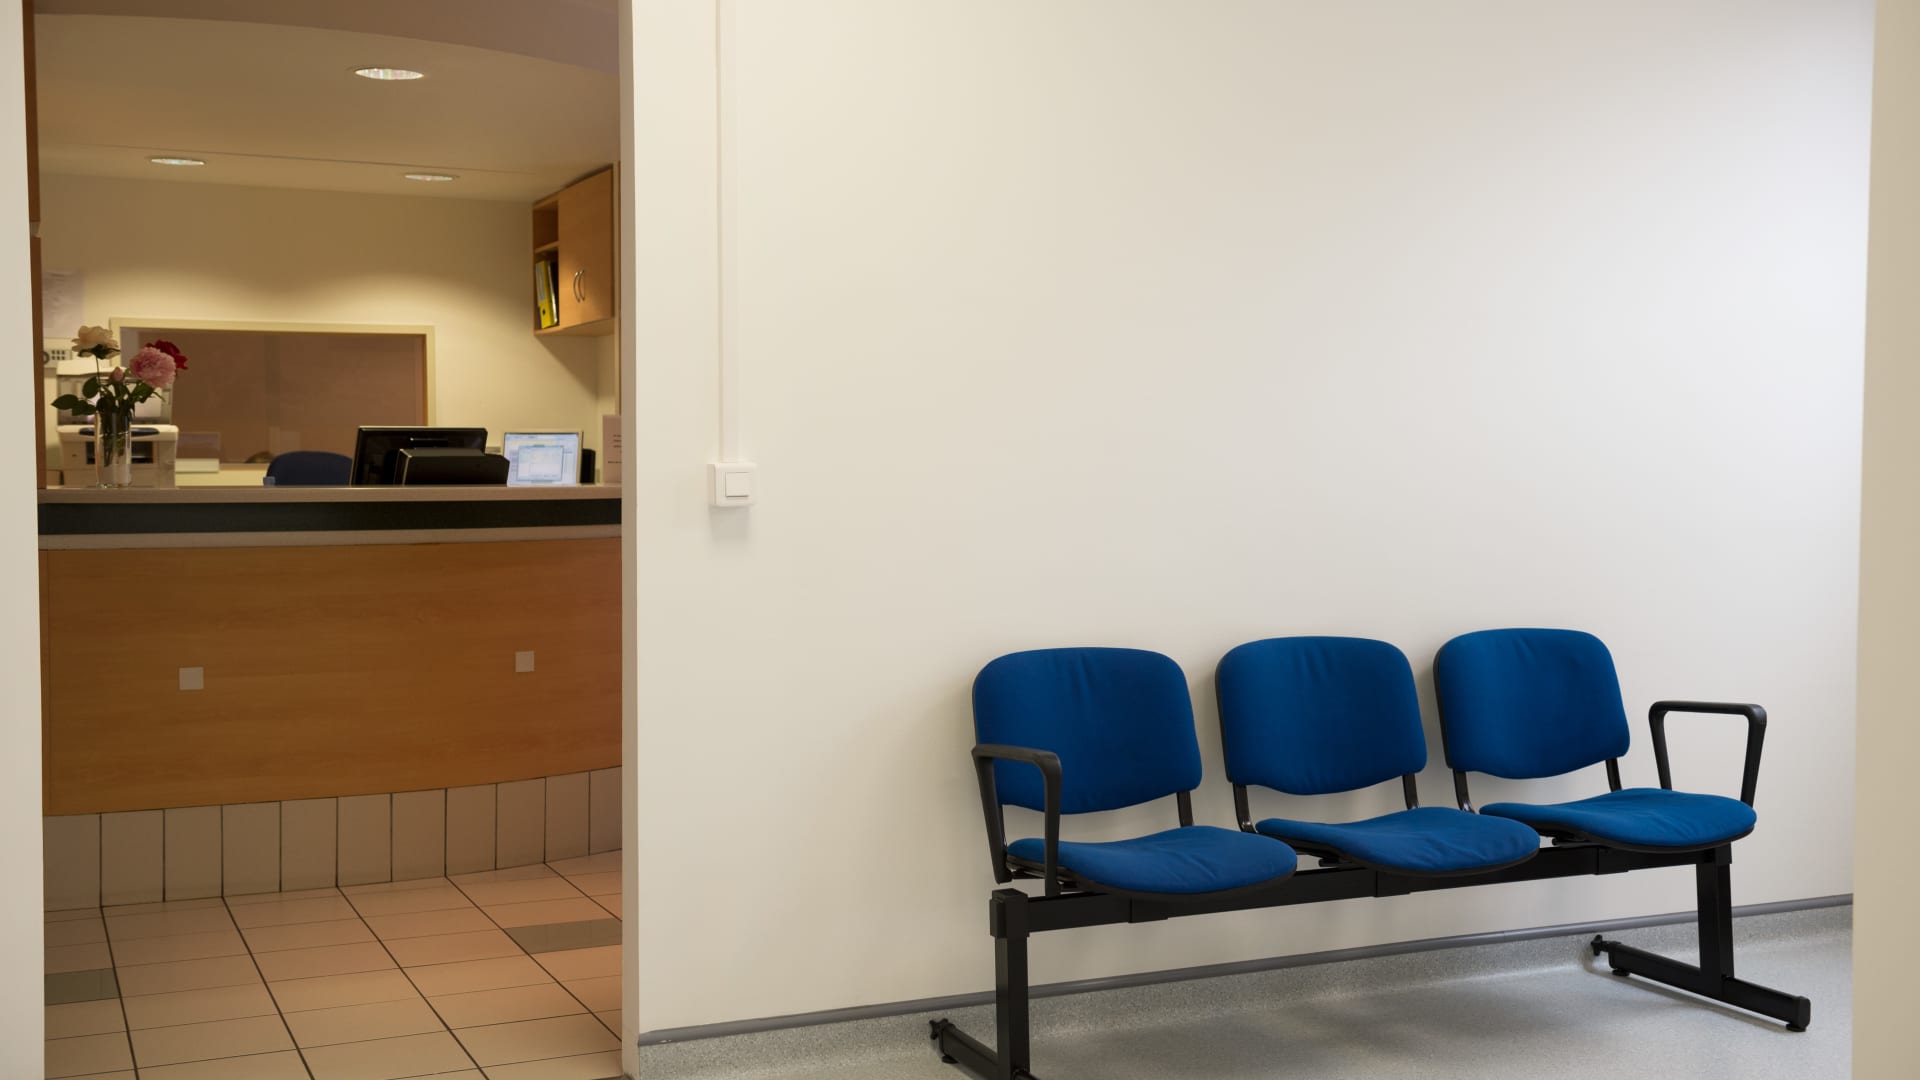 I was charged $150 for missing a doctor's appointment. Turns out these fees are on the rise